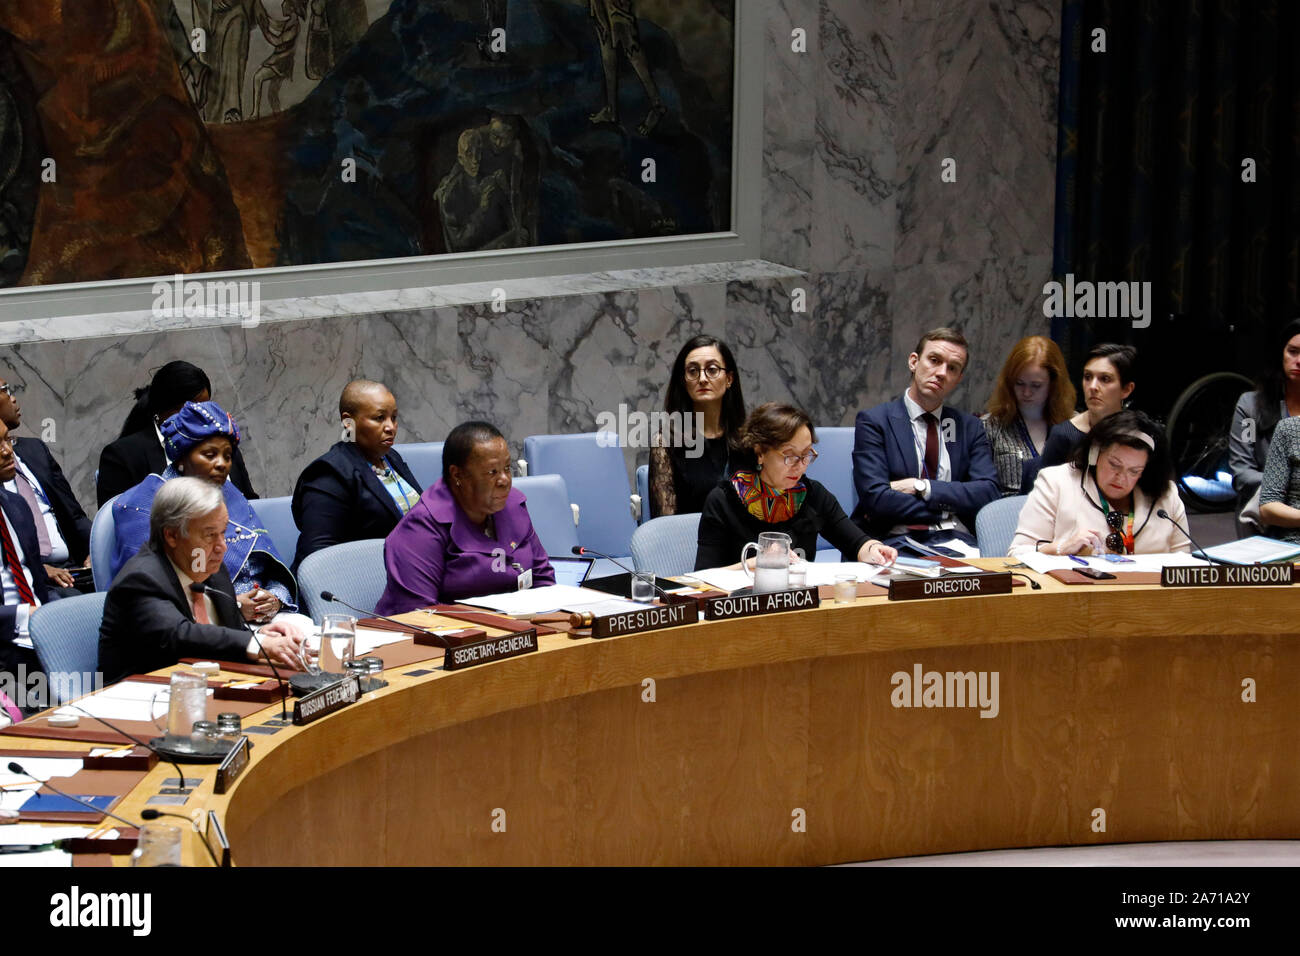 United Nations, Peace and Security Agenda at the UN headquarters in New York. 29th Oct, 2019. Naledi Pandor (2nd L, front), South African International Relations and Cooperation Minister and President of the Security Council for the month of October, chairs a Security Council meeting on Women, Peace and Security Agenda at the UN headquarters in New York, Oct. 29, 2019. The UN Security Council on Tuesday adopted a resolution to reinforce the Women, Peace and Security Agenda in the lead up to the commemoration of its 20th anniversary. Credit: Li Muzi/Xinhua/Alamy Live News Stock Photo